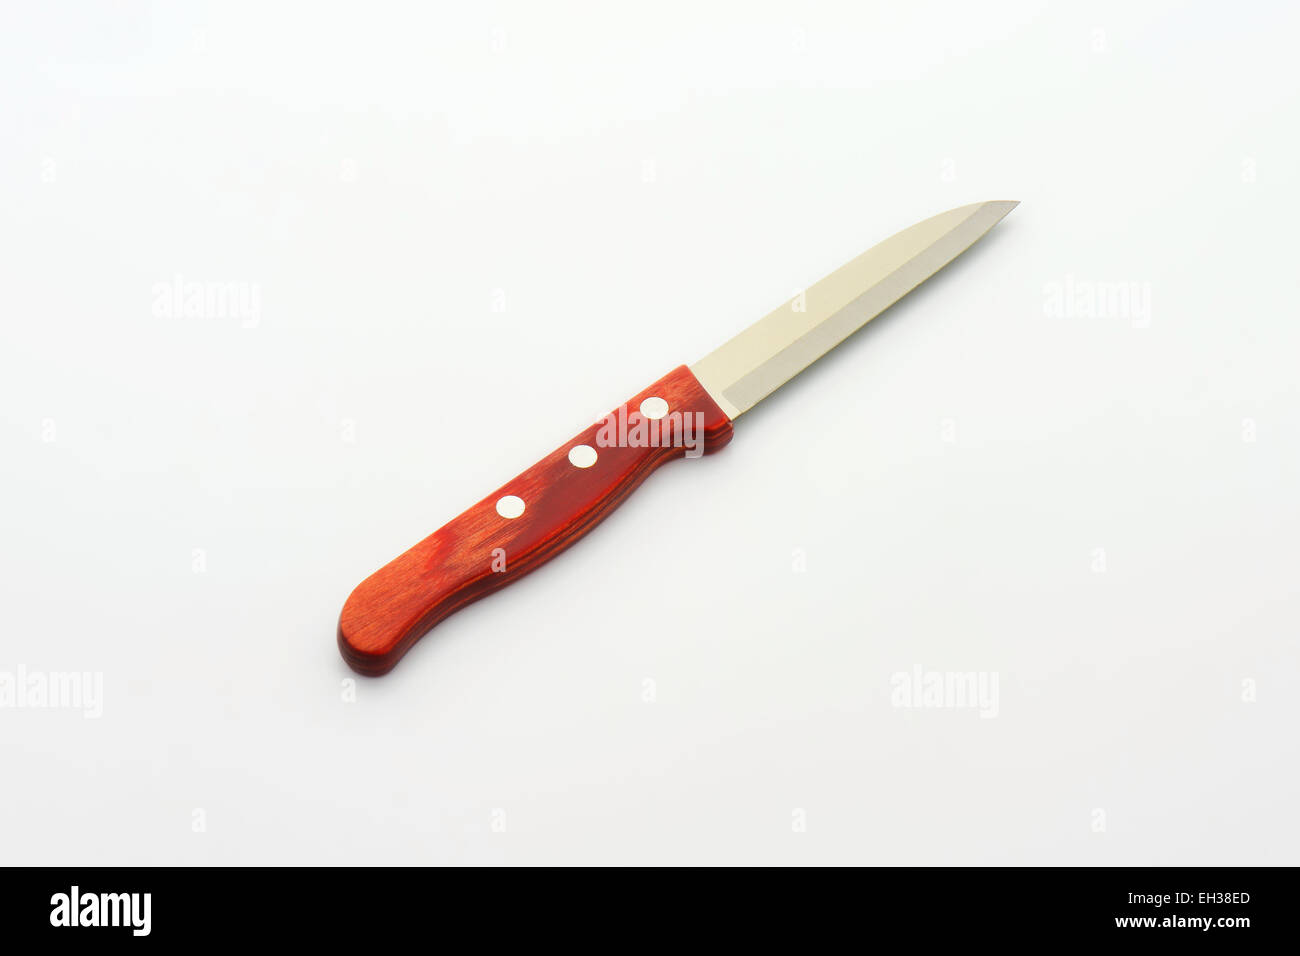 Small vegetable knife with wooden grip on white background Stock Photo